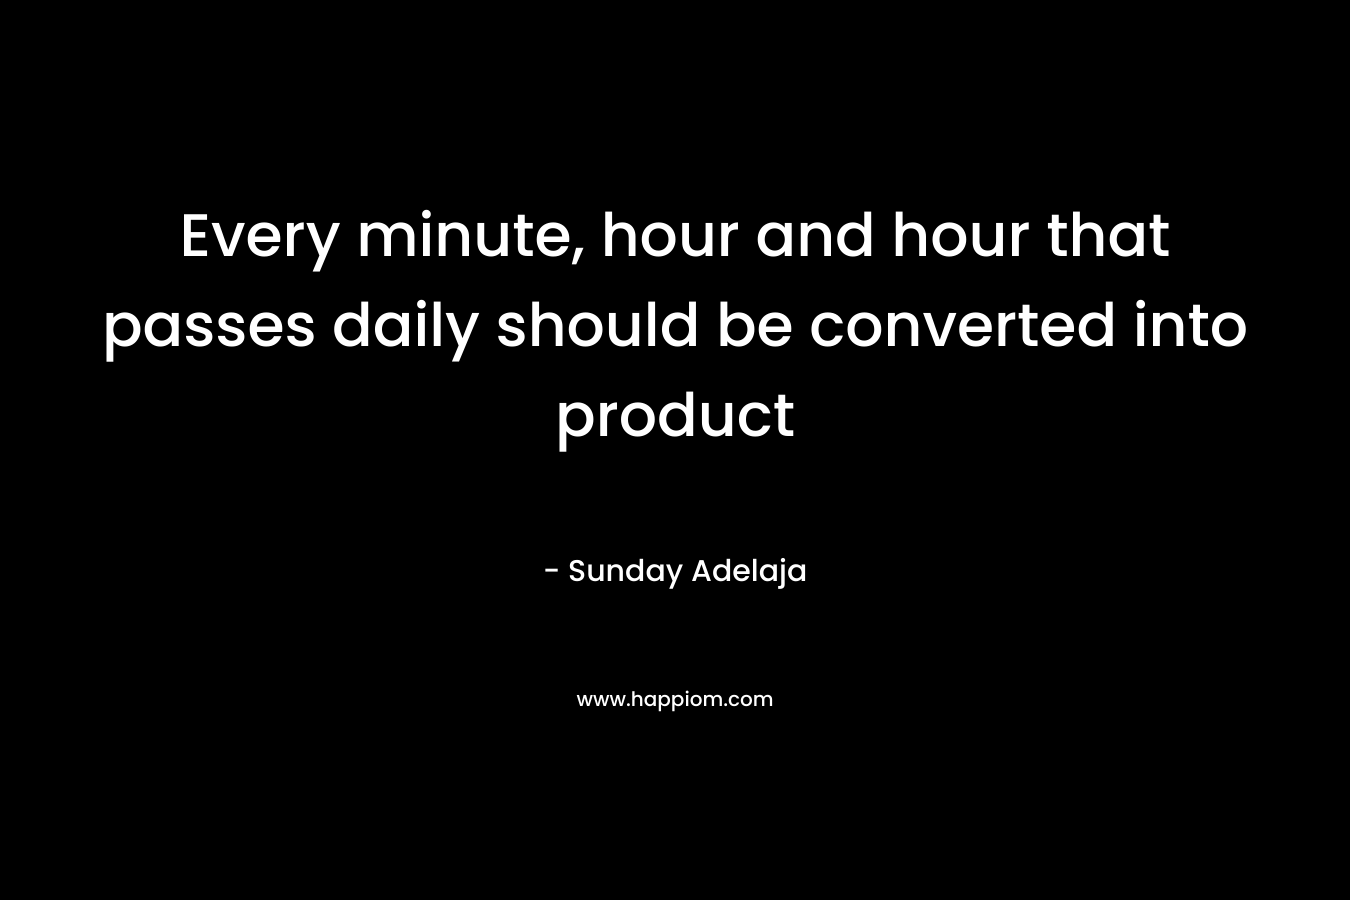 Every minute, hour and hour that passes daily should be converted into product